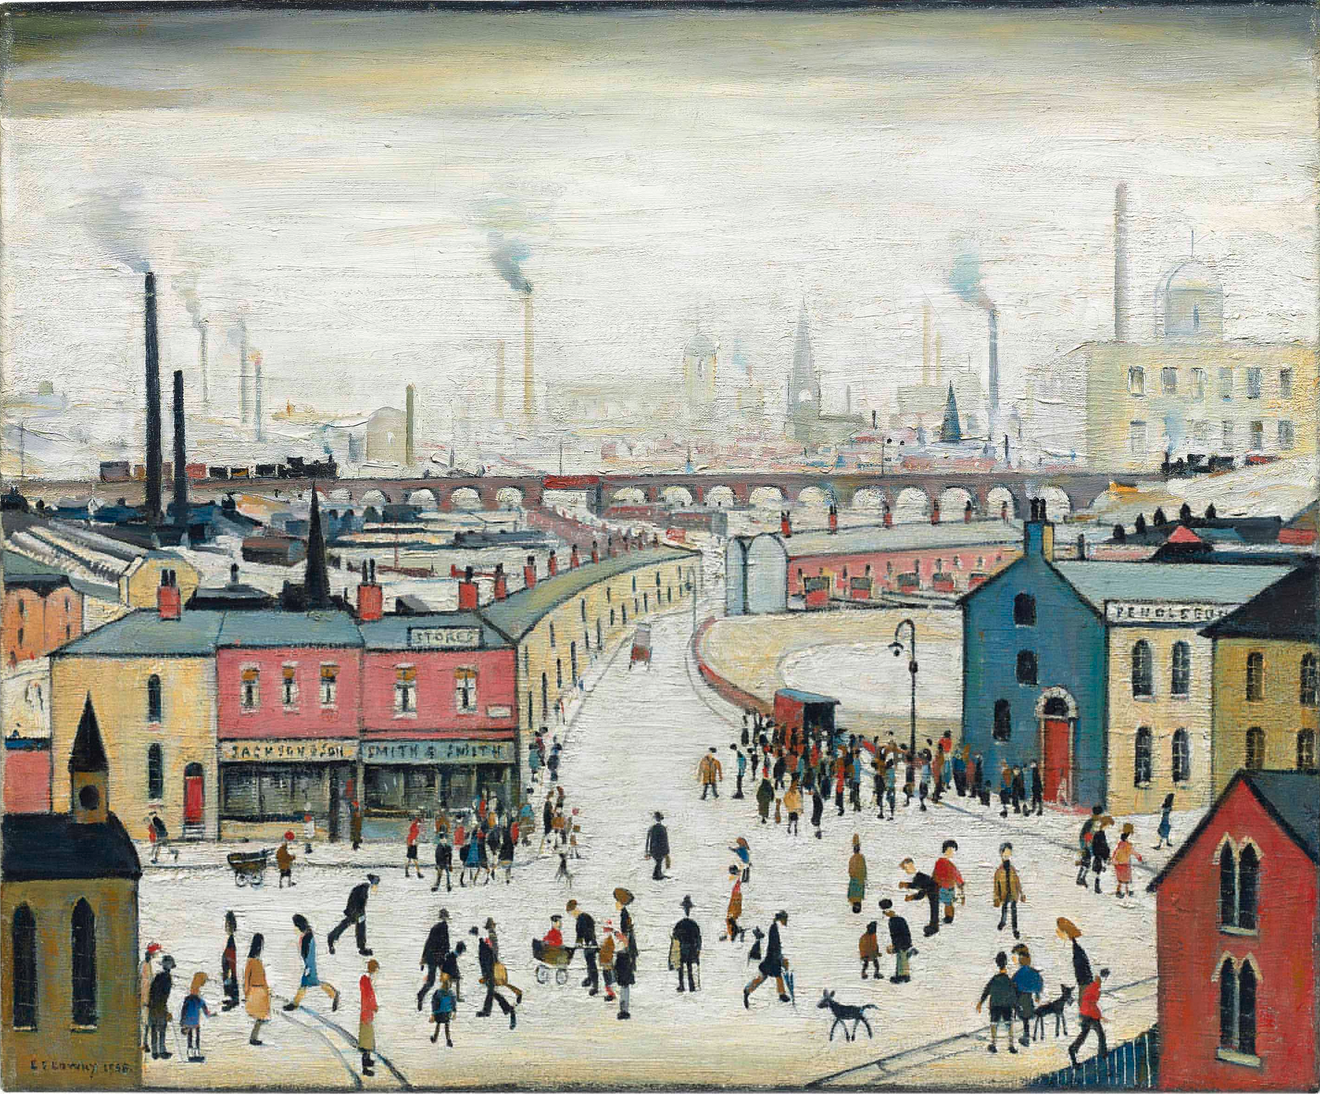 Industrial landscape: Stockport Viaduct (1958) by Laurence Stephen Lowry (1887 - 1976), English artist.